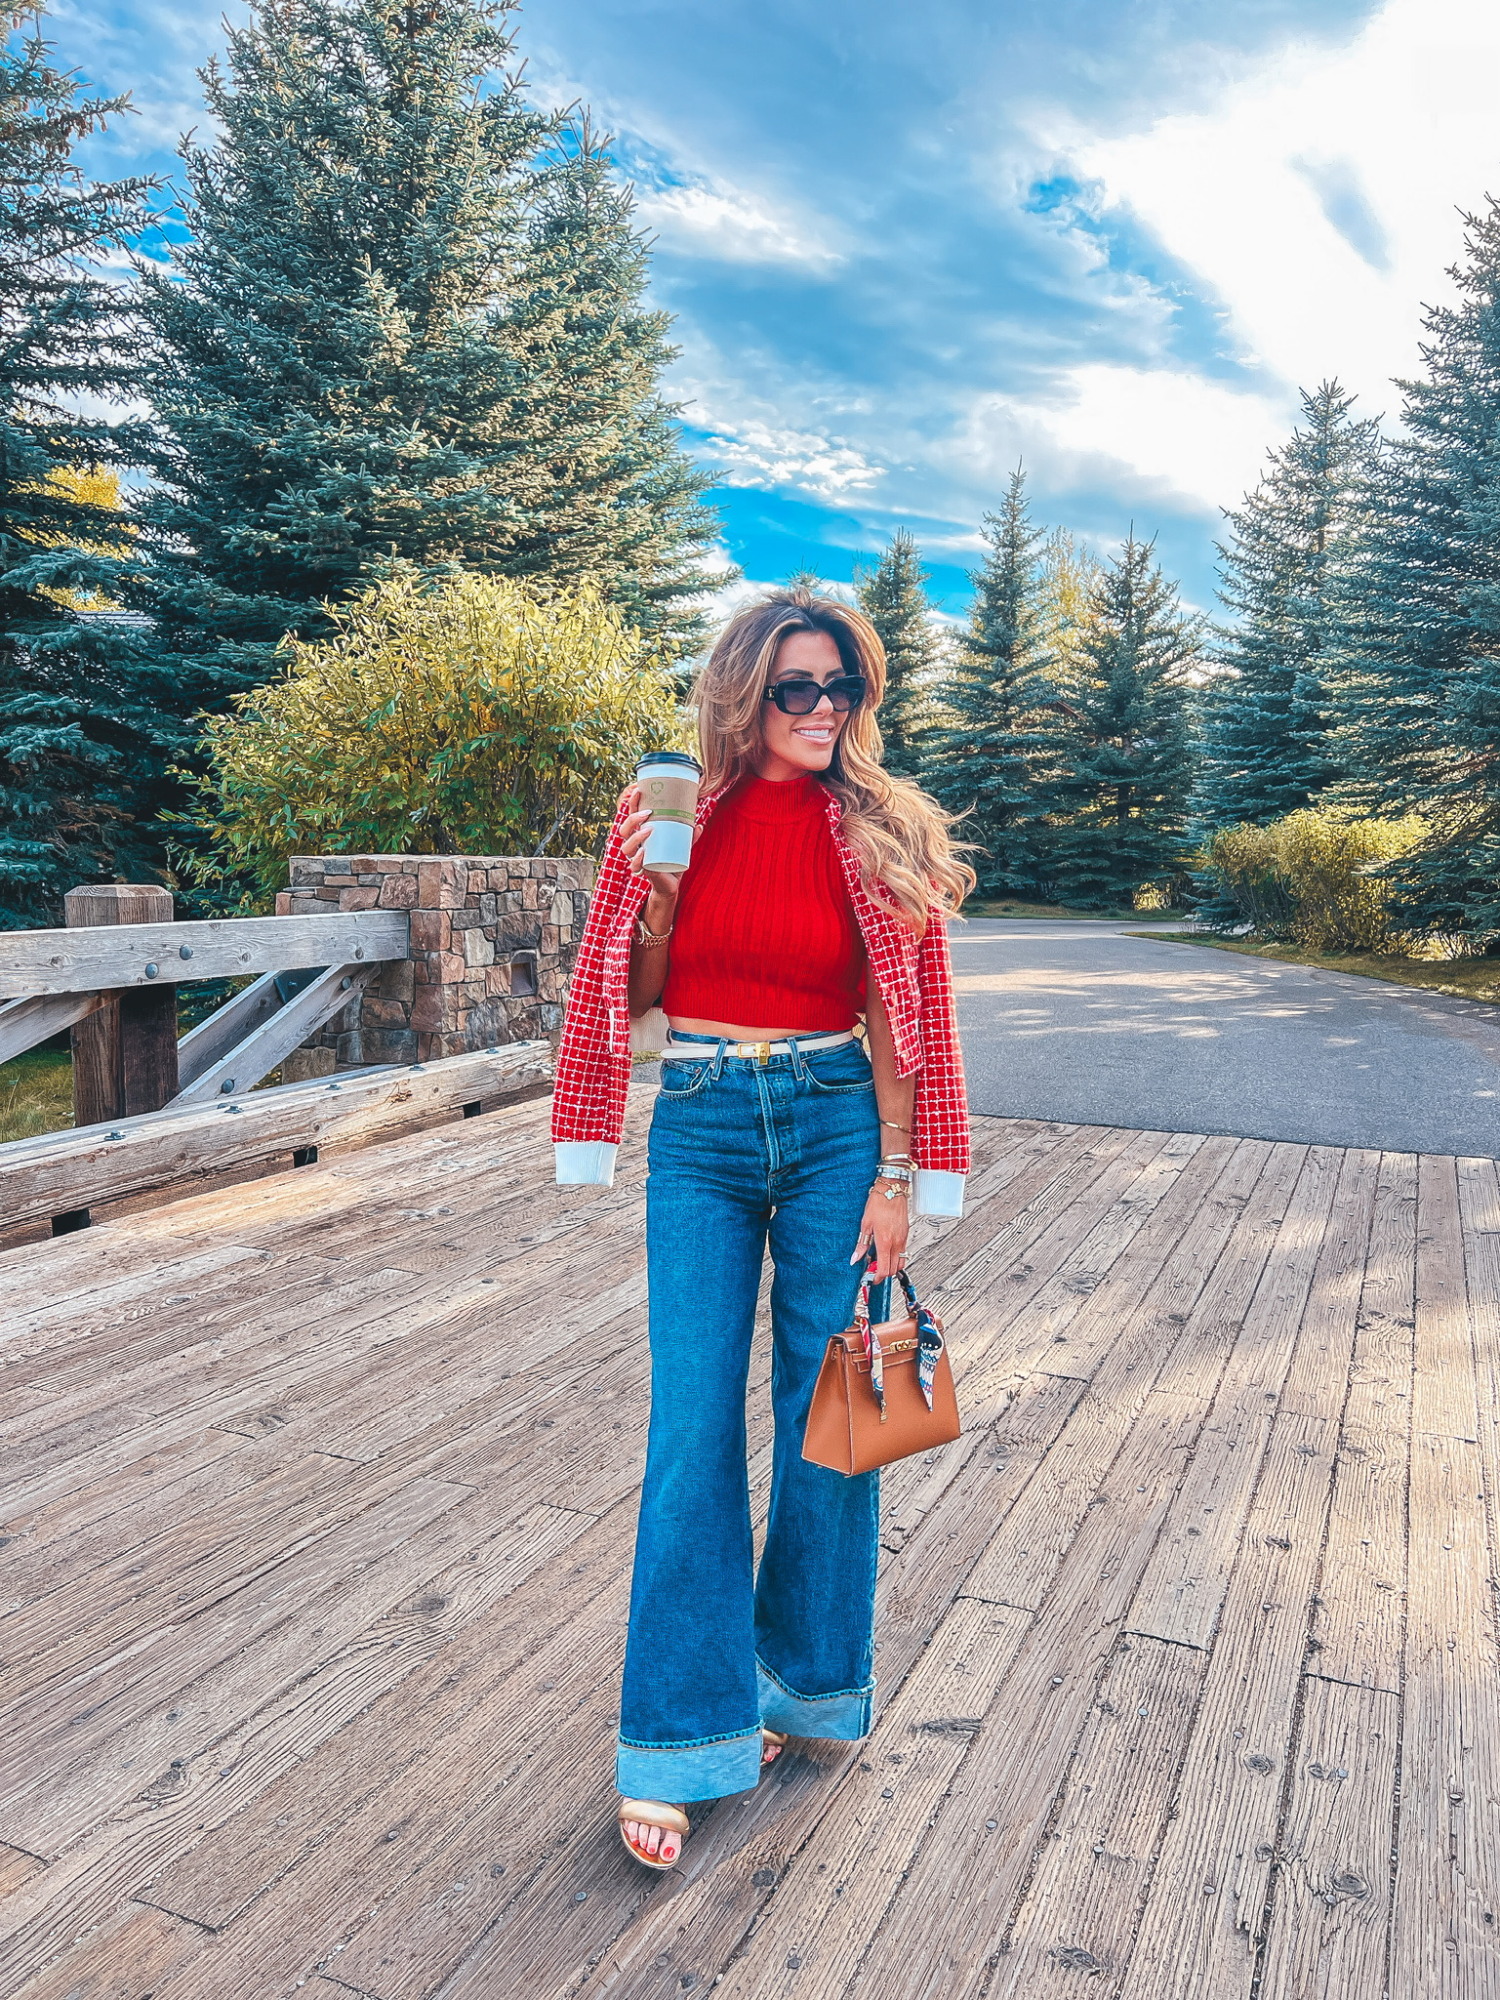 Mini Red Birkin Bag 25 Outfit Idea  Outfit inspirations, Outfits, Birkin  bag